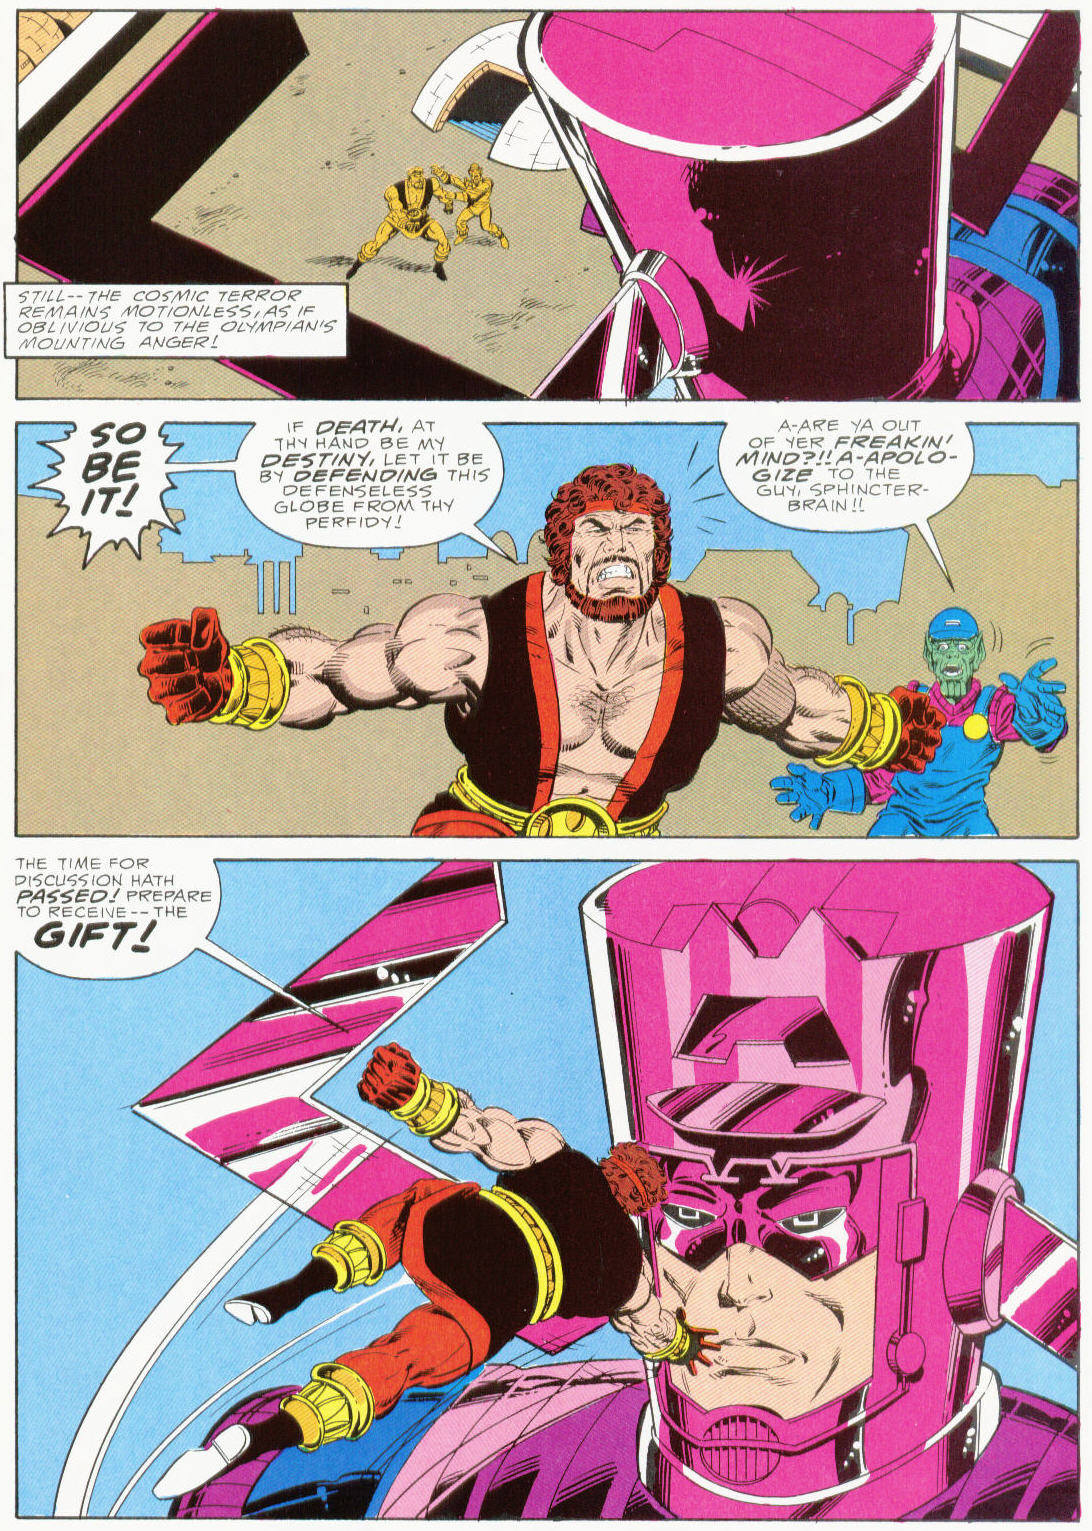 Marvel Graphic Novel issue 37 - Hercules Prince of Power - Full Circle - Page 25